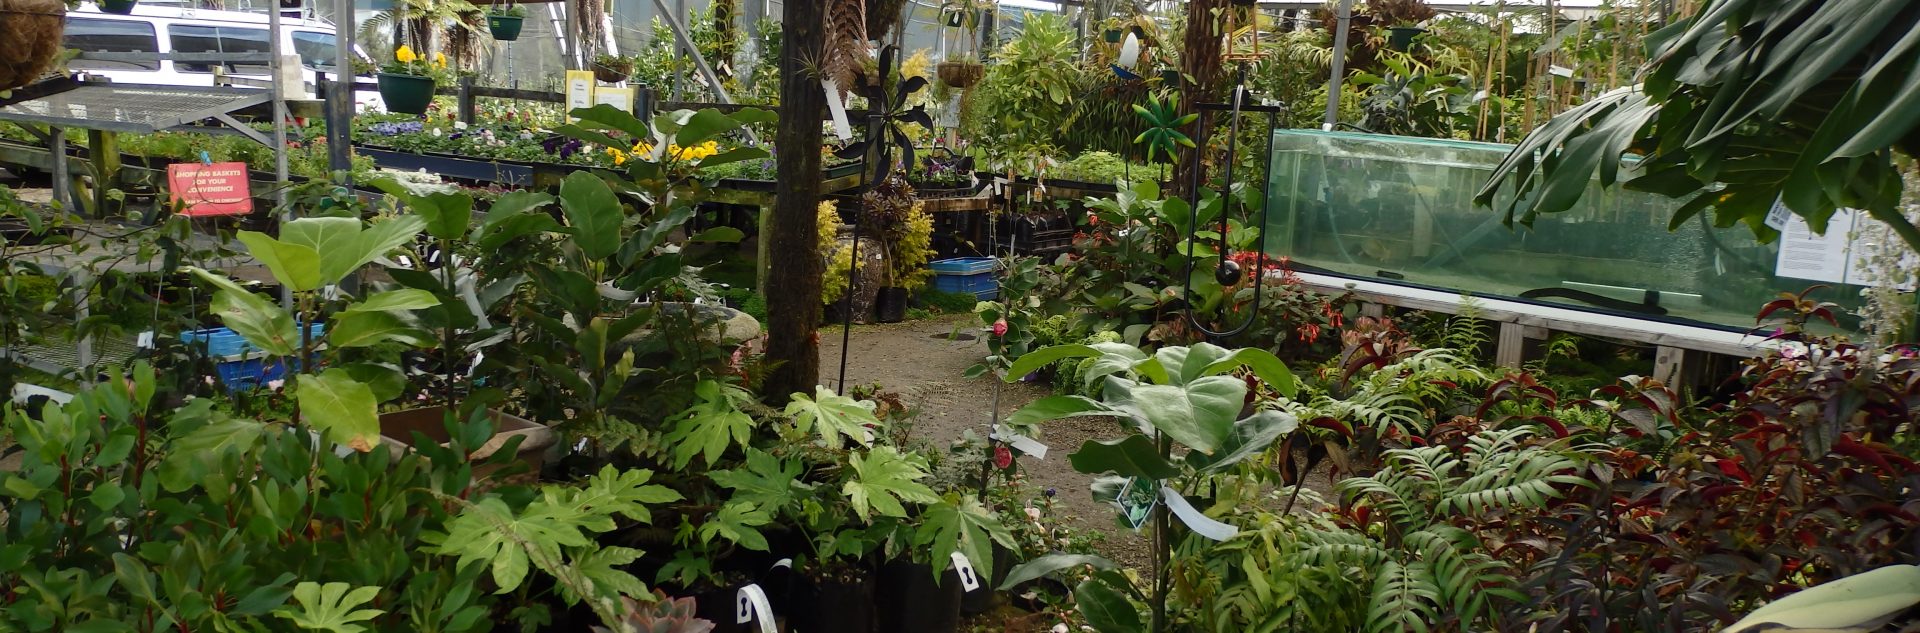 The Plant Place Largest Garden Center In Hamilton